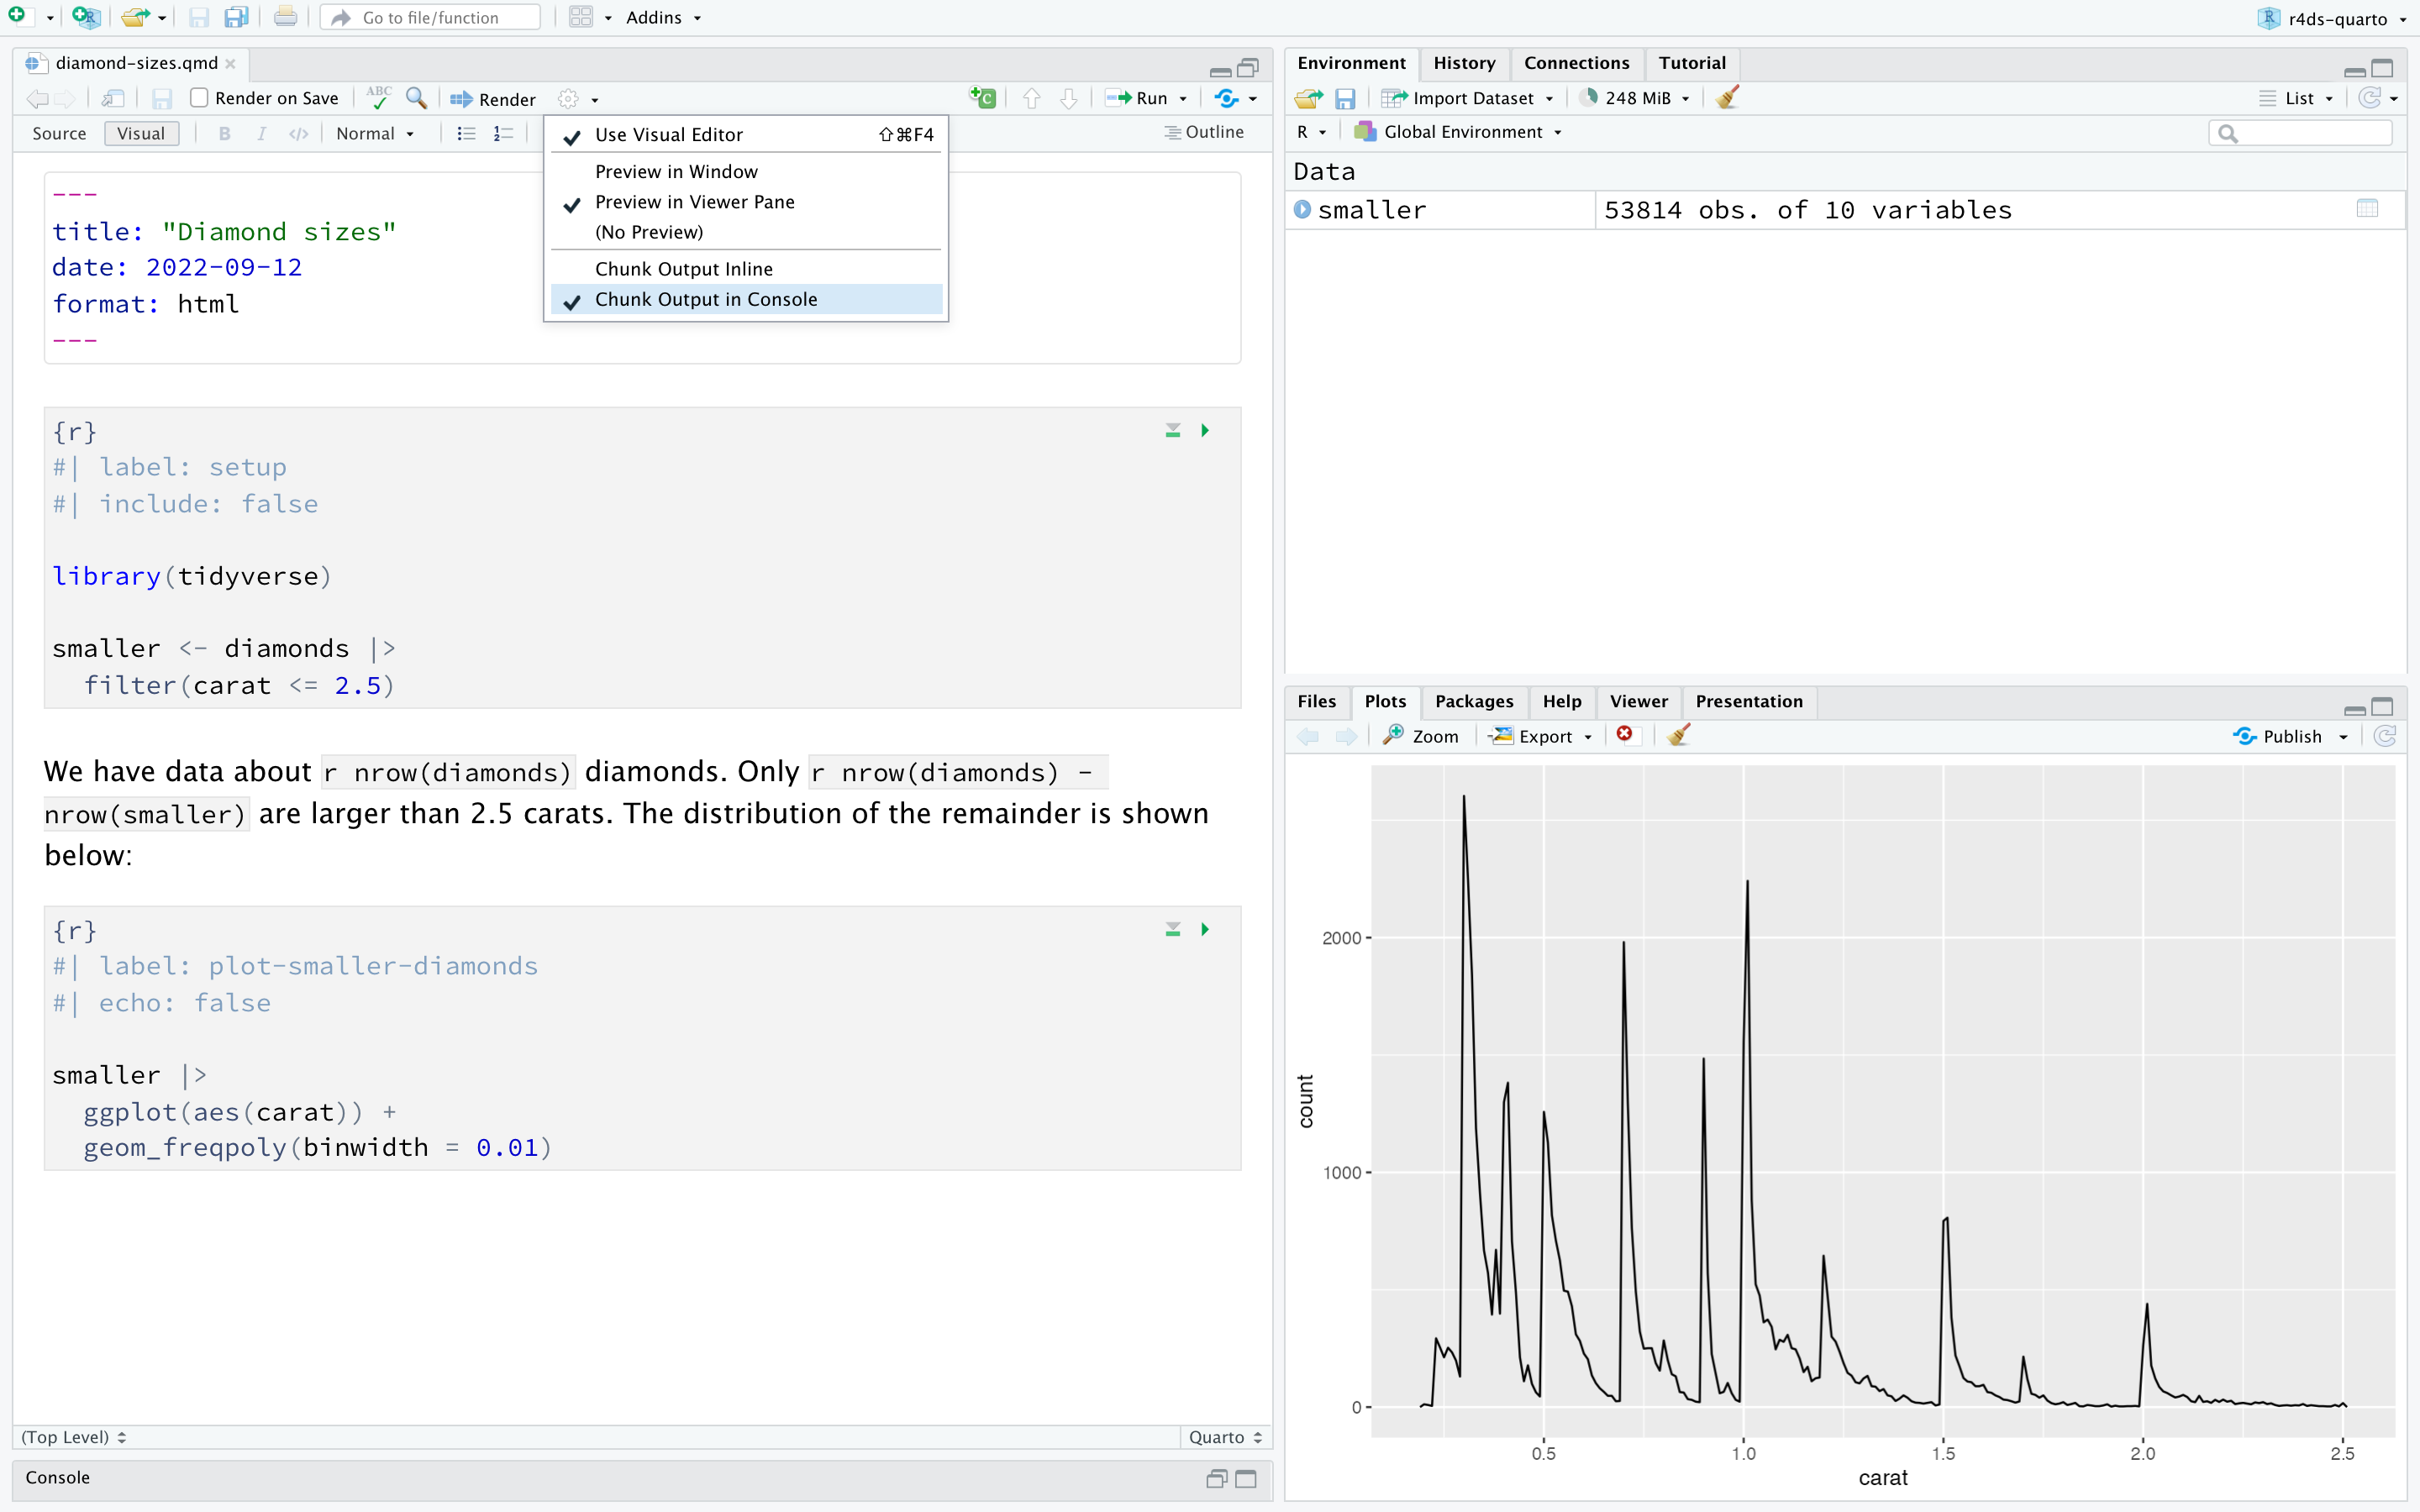 RStudio window with a Quarto document titled "diamond-sizes.qmd" on the left and the Plot pane on the bottom right. The Quarto document has a code chunk that creates a frequency plot of diamonds that weigh less than 2.5 carats. The plot is displayed in the Plot pane and shows that the frequency decreases as the weight increases. The RStudio option to show Chunk Output in Console is also highlighted.